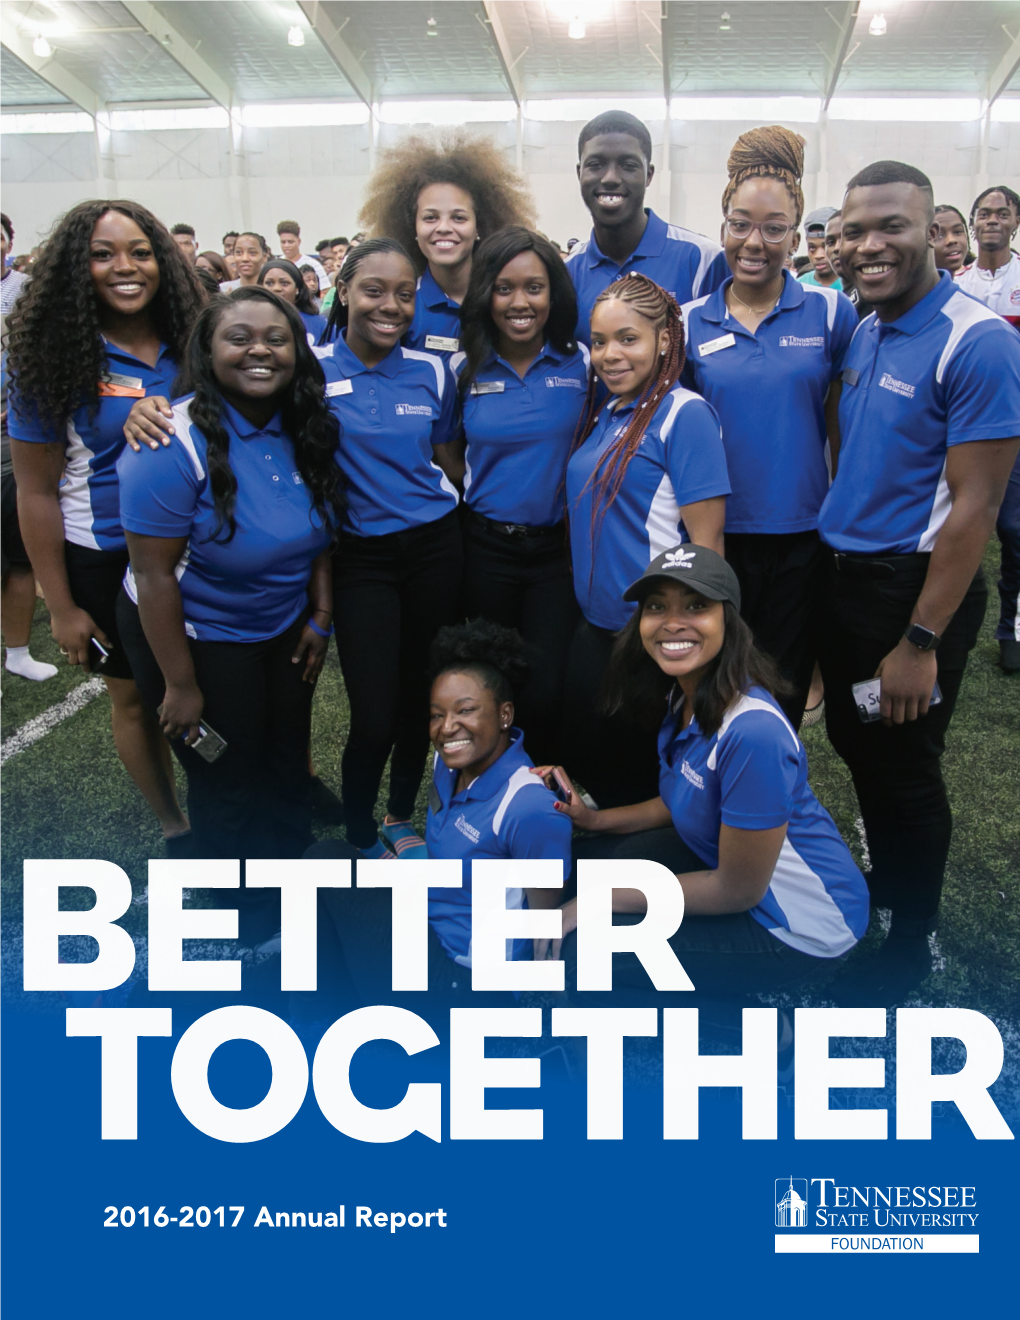 2016-2017 Annual Report Tennessee State University Foundation 2016-2017 BETTER Annual Report